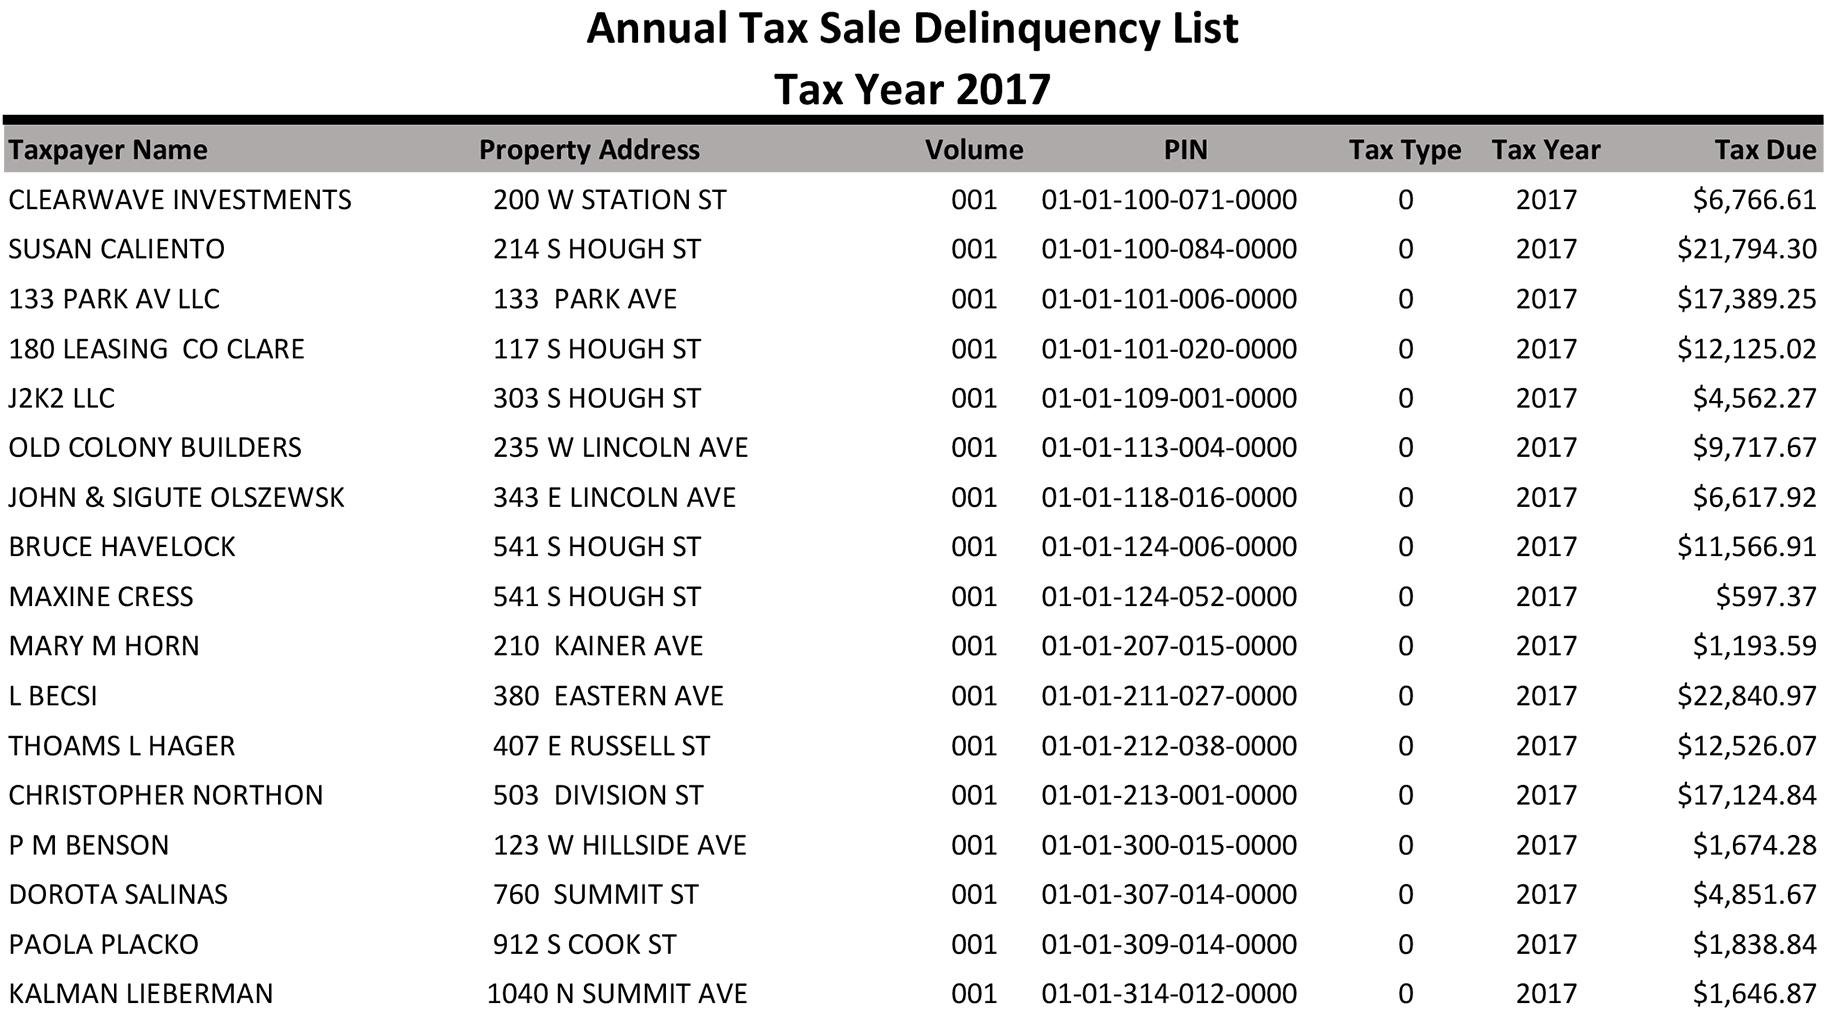 Document: 2017 Annual Tax Sale Delinquency List